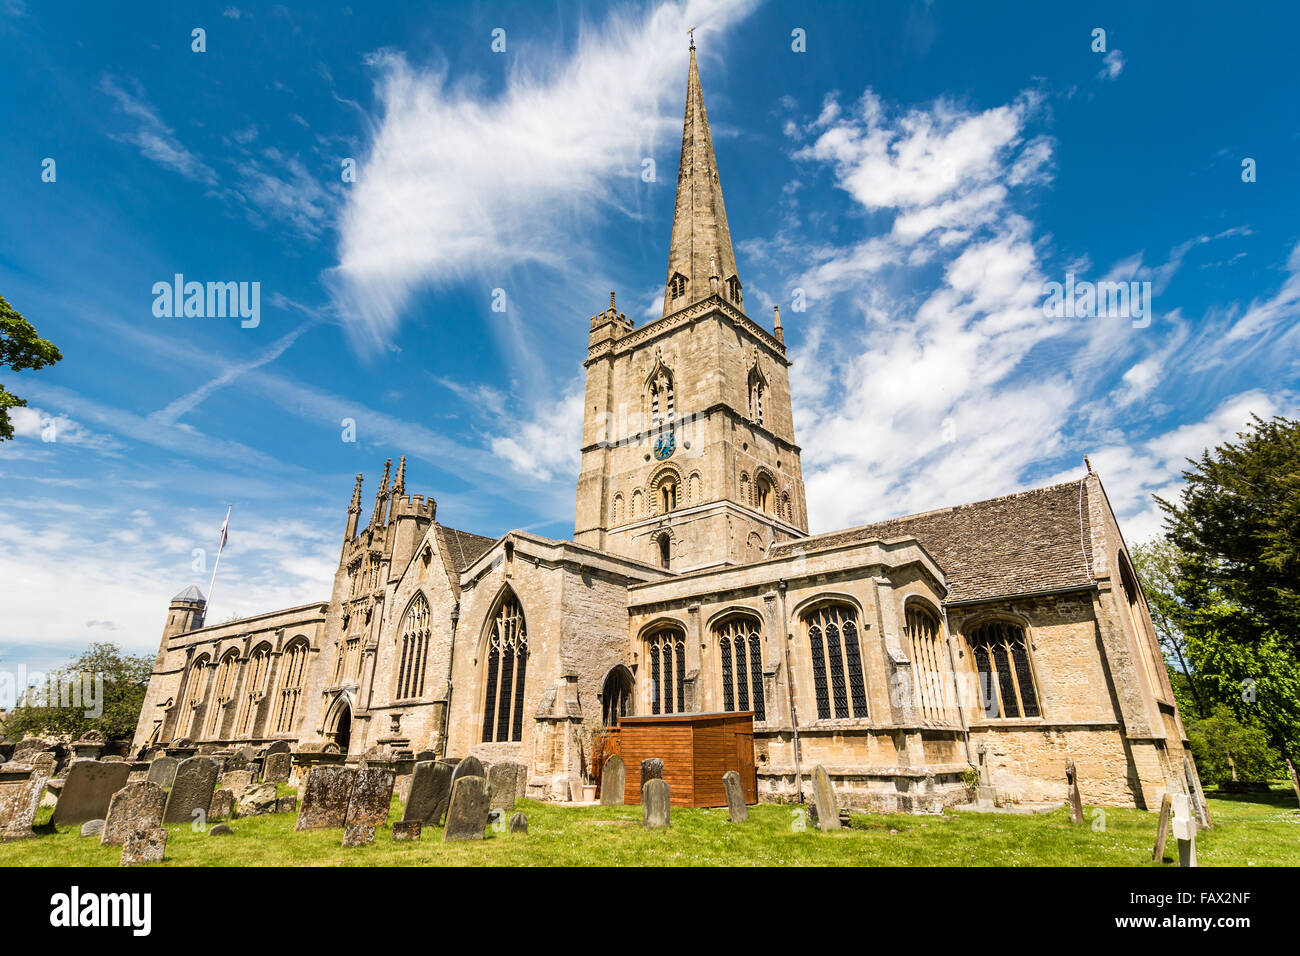 St John the Baptist church with old gravestones in the foreground, Burford, Oxfordshire, England, UK, Western Europe. Stock Photo